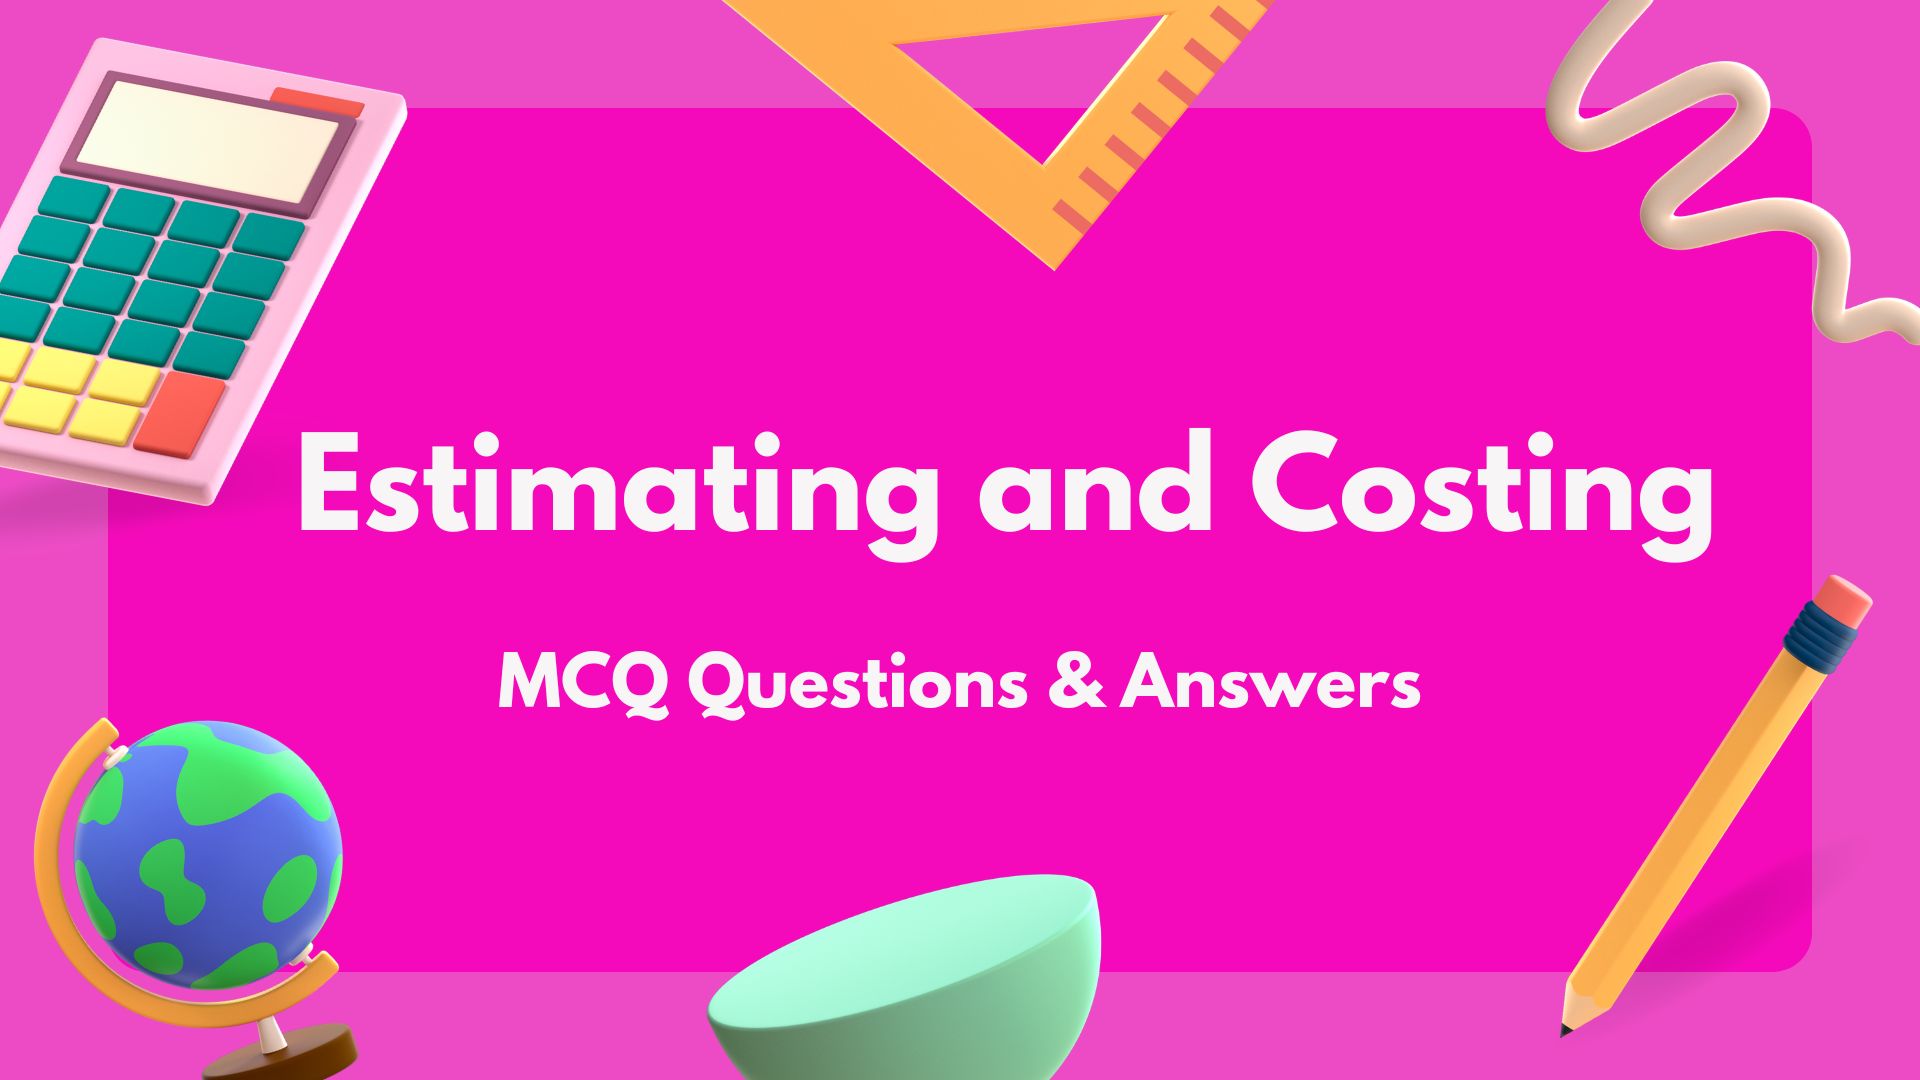 Estimating and Costing MCQ Questions & Answers